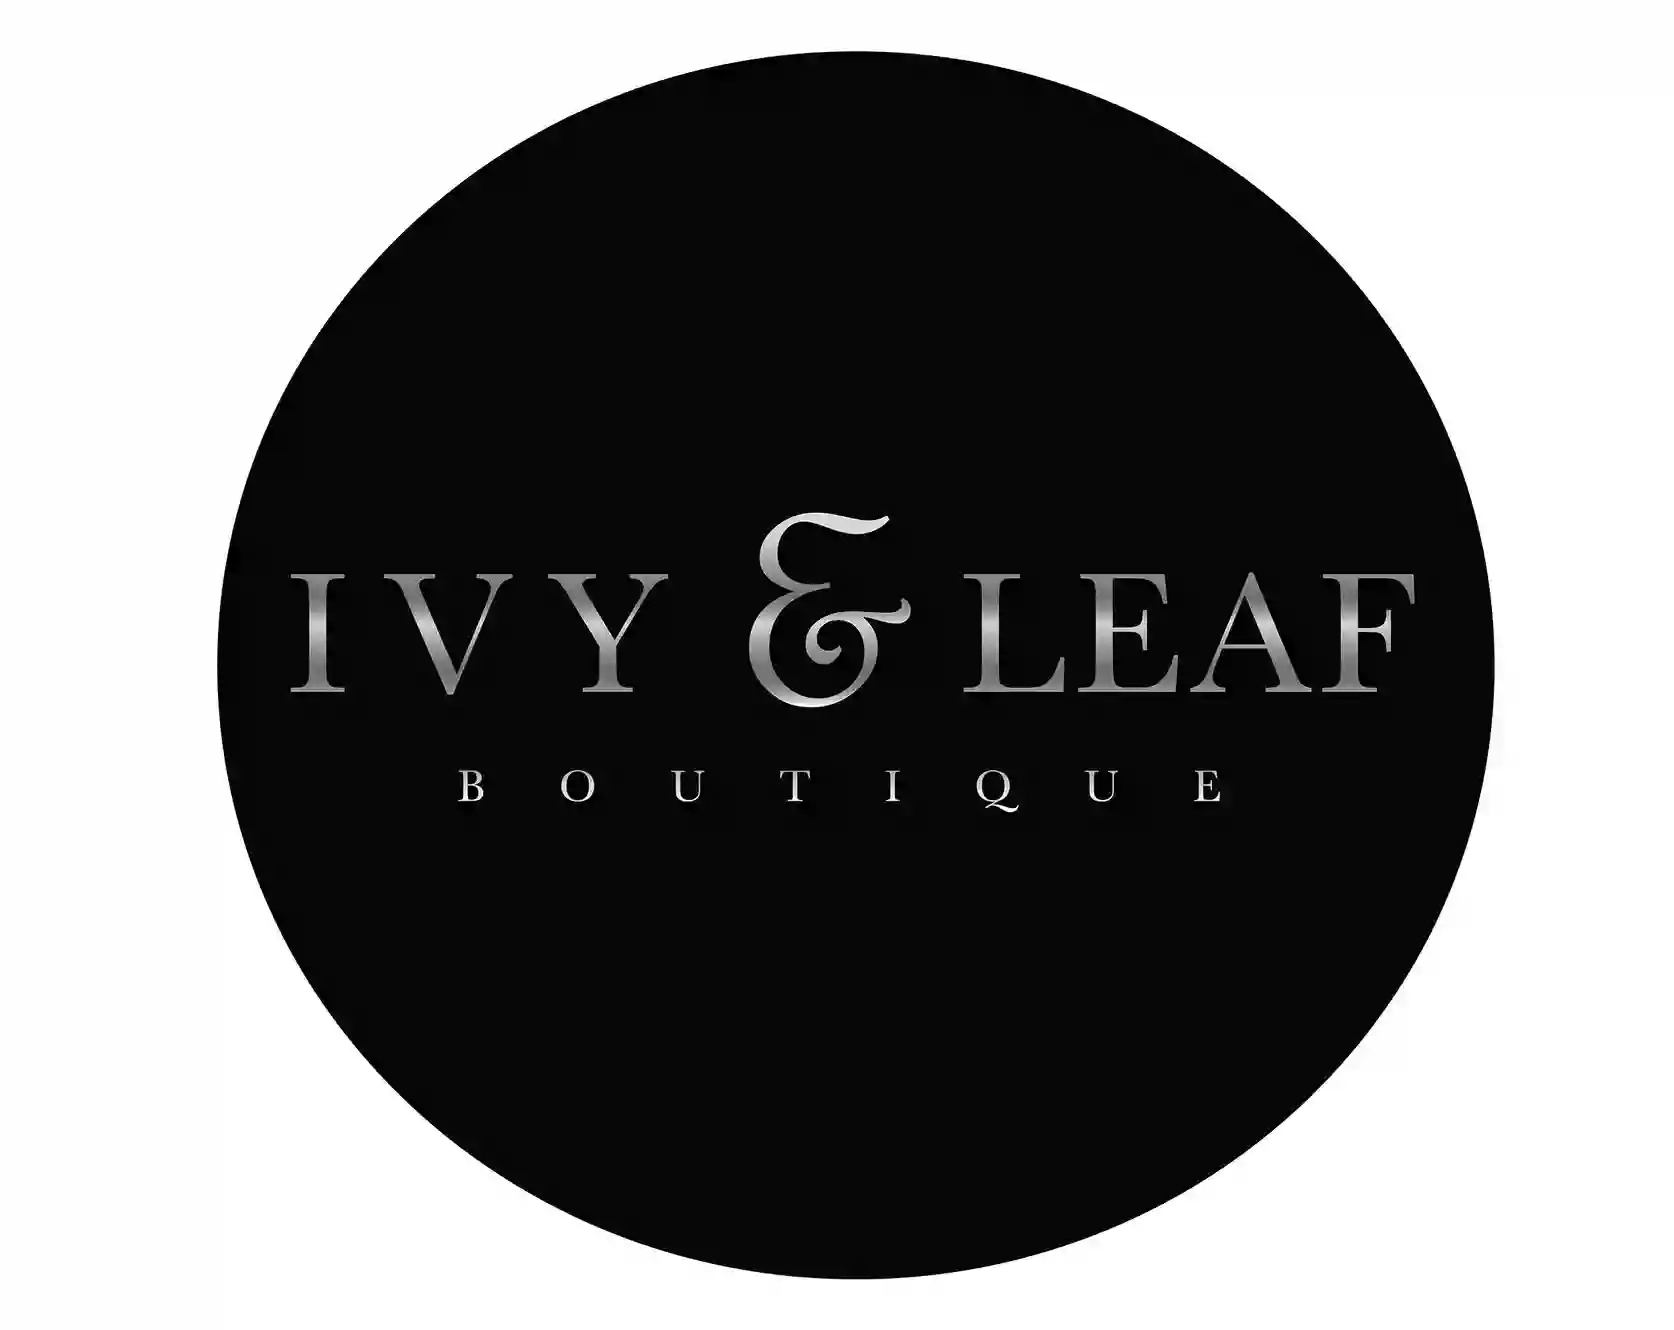 Ivy and Leaf boutique